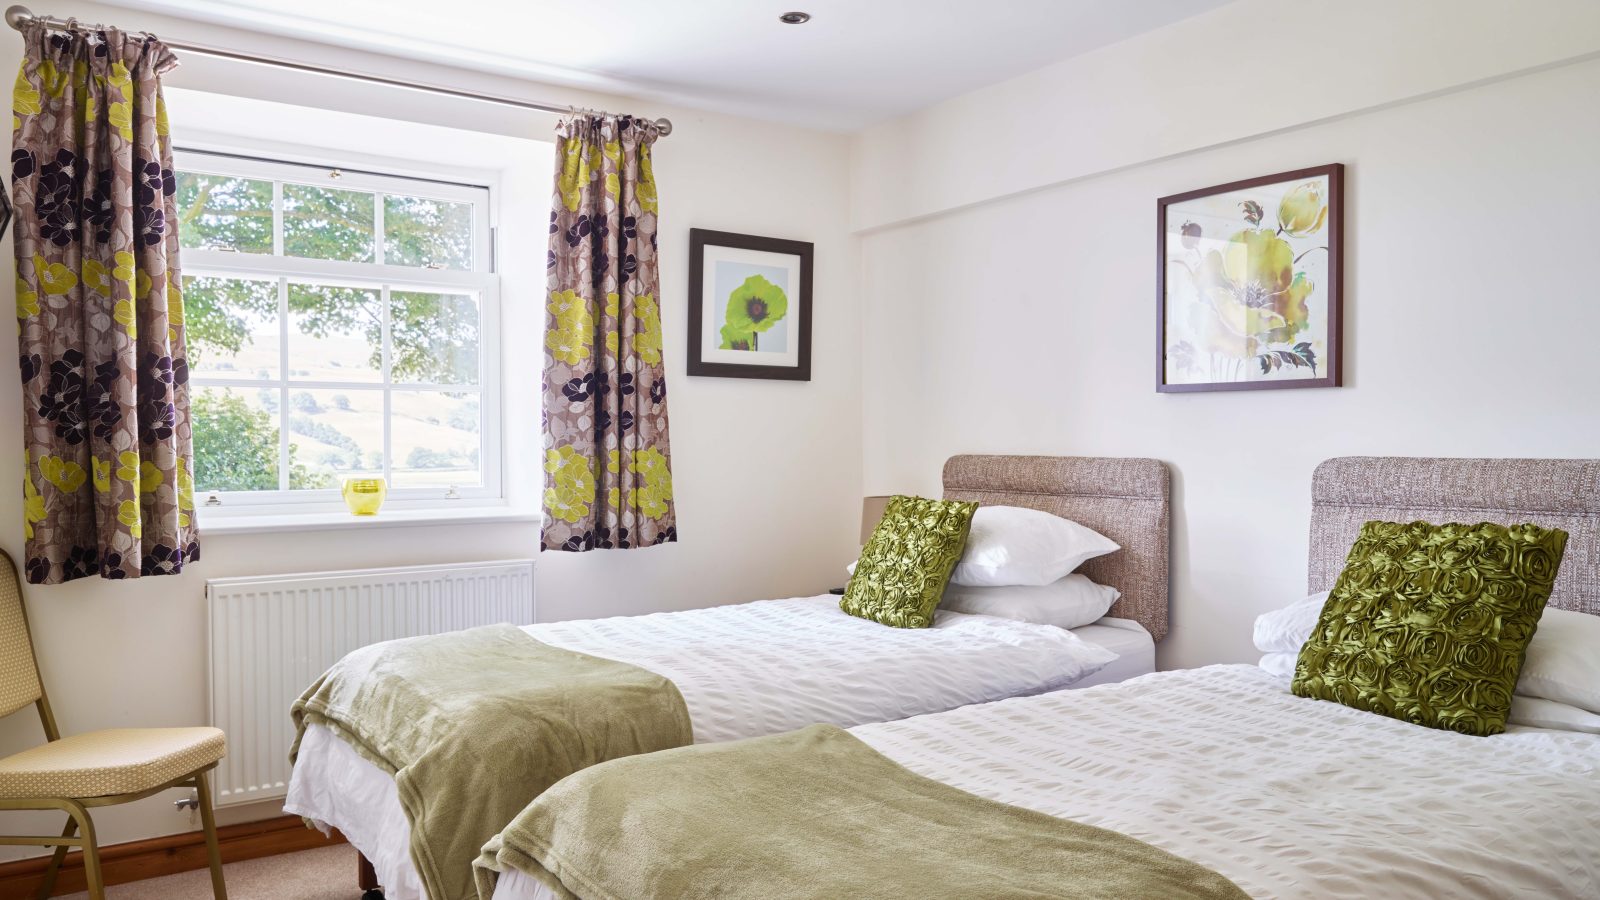 Severn Valley Cottages - kate & tom's Large Holiday Homes